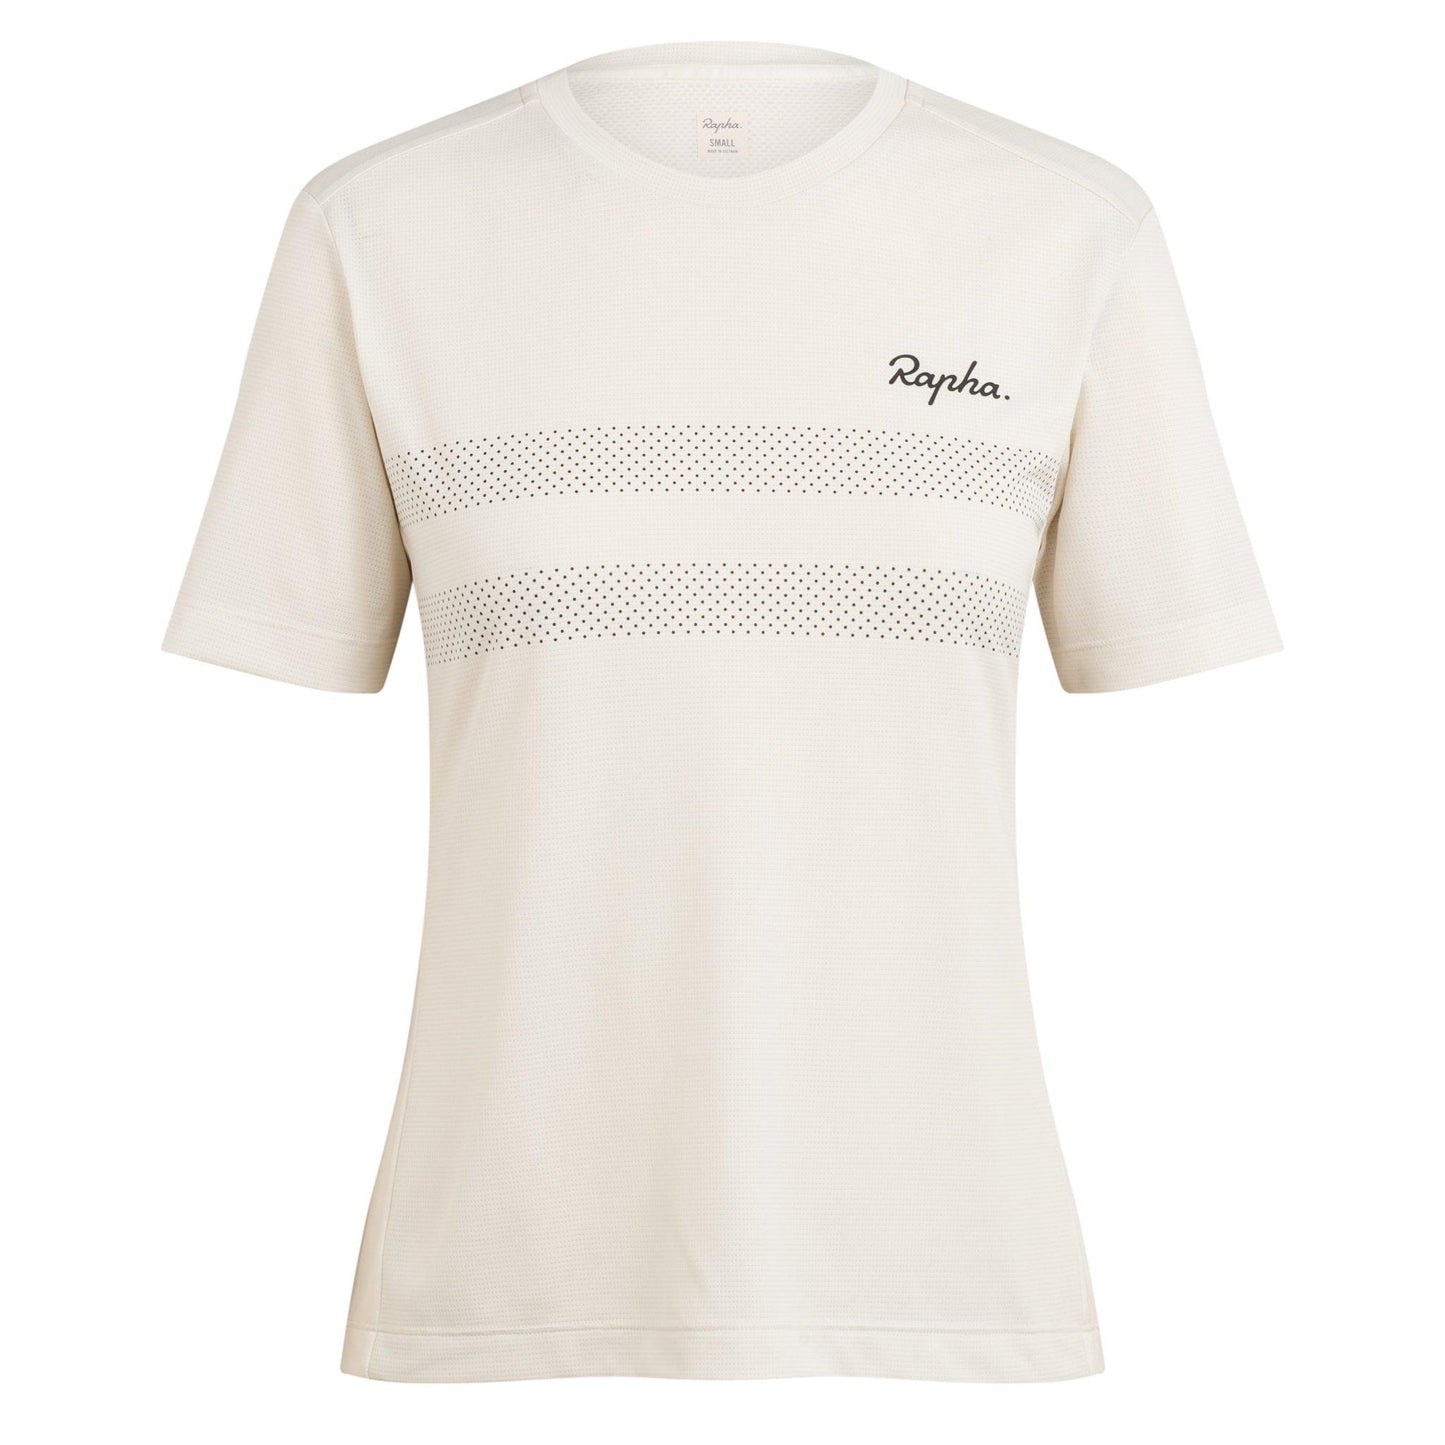 Rapha Women's Explore Technical T-Shirt, Off-White buy online at Woolys Wheels Sydney